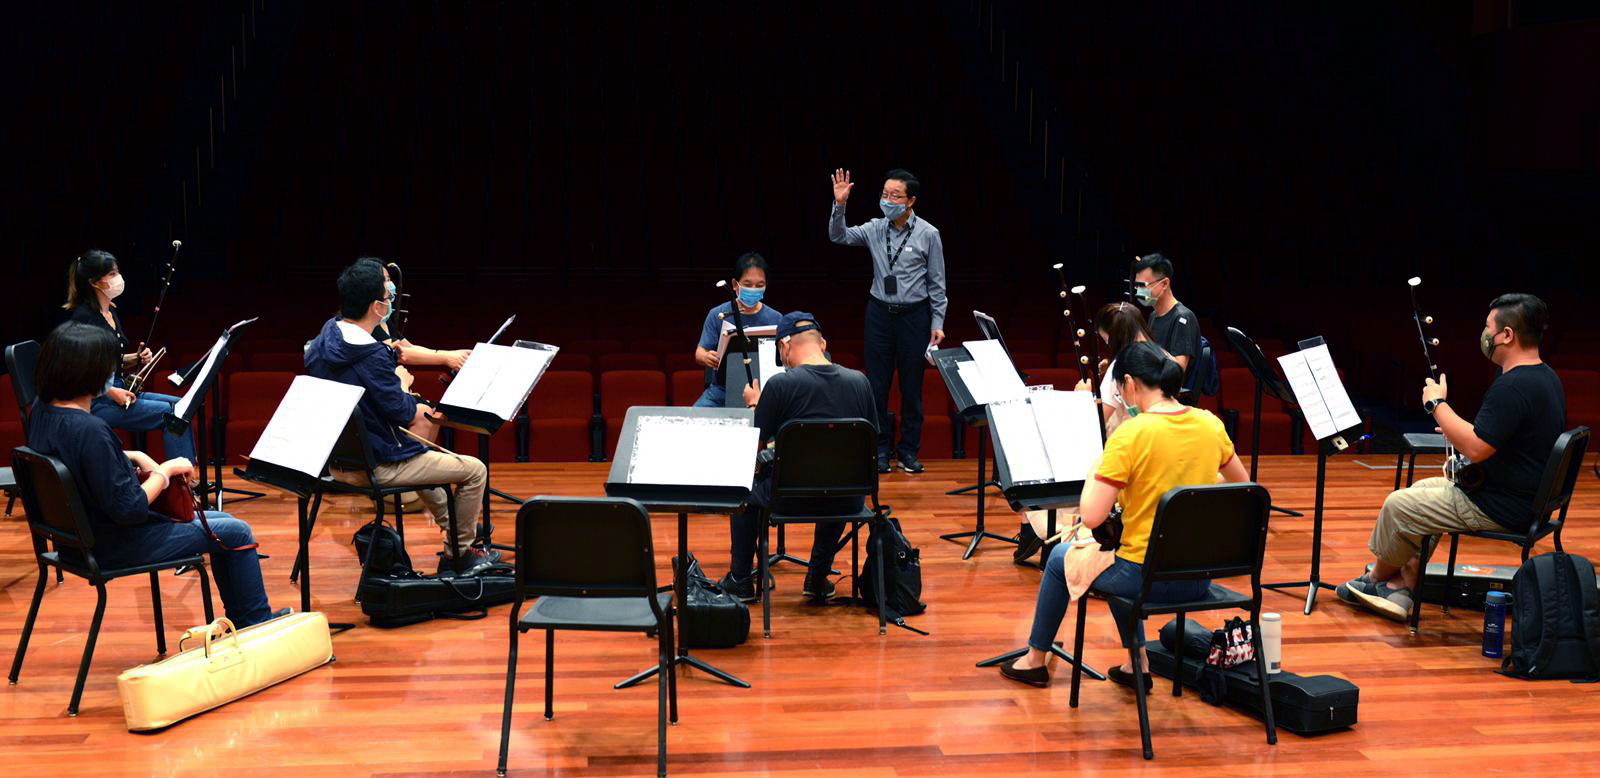 sco-photo-editorial-23 COVID-19 Phase 2: Lights on! Singapore Chinese Orchestra back to rehearsal after 91 days